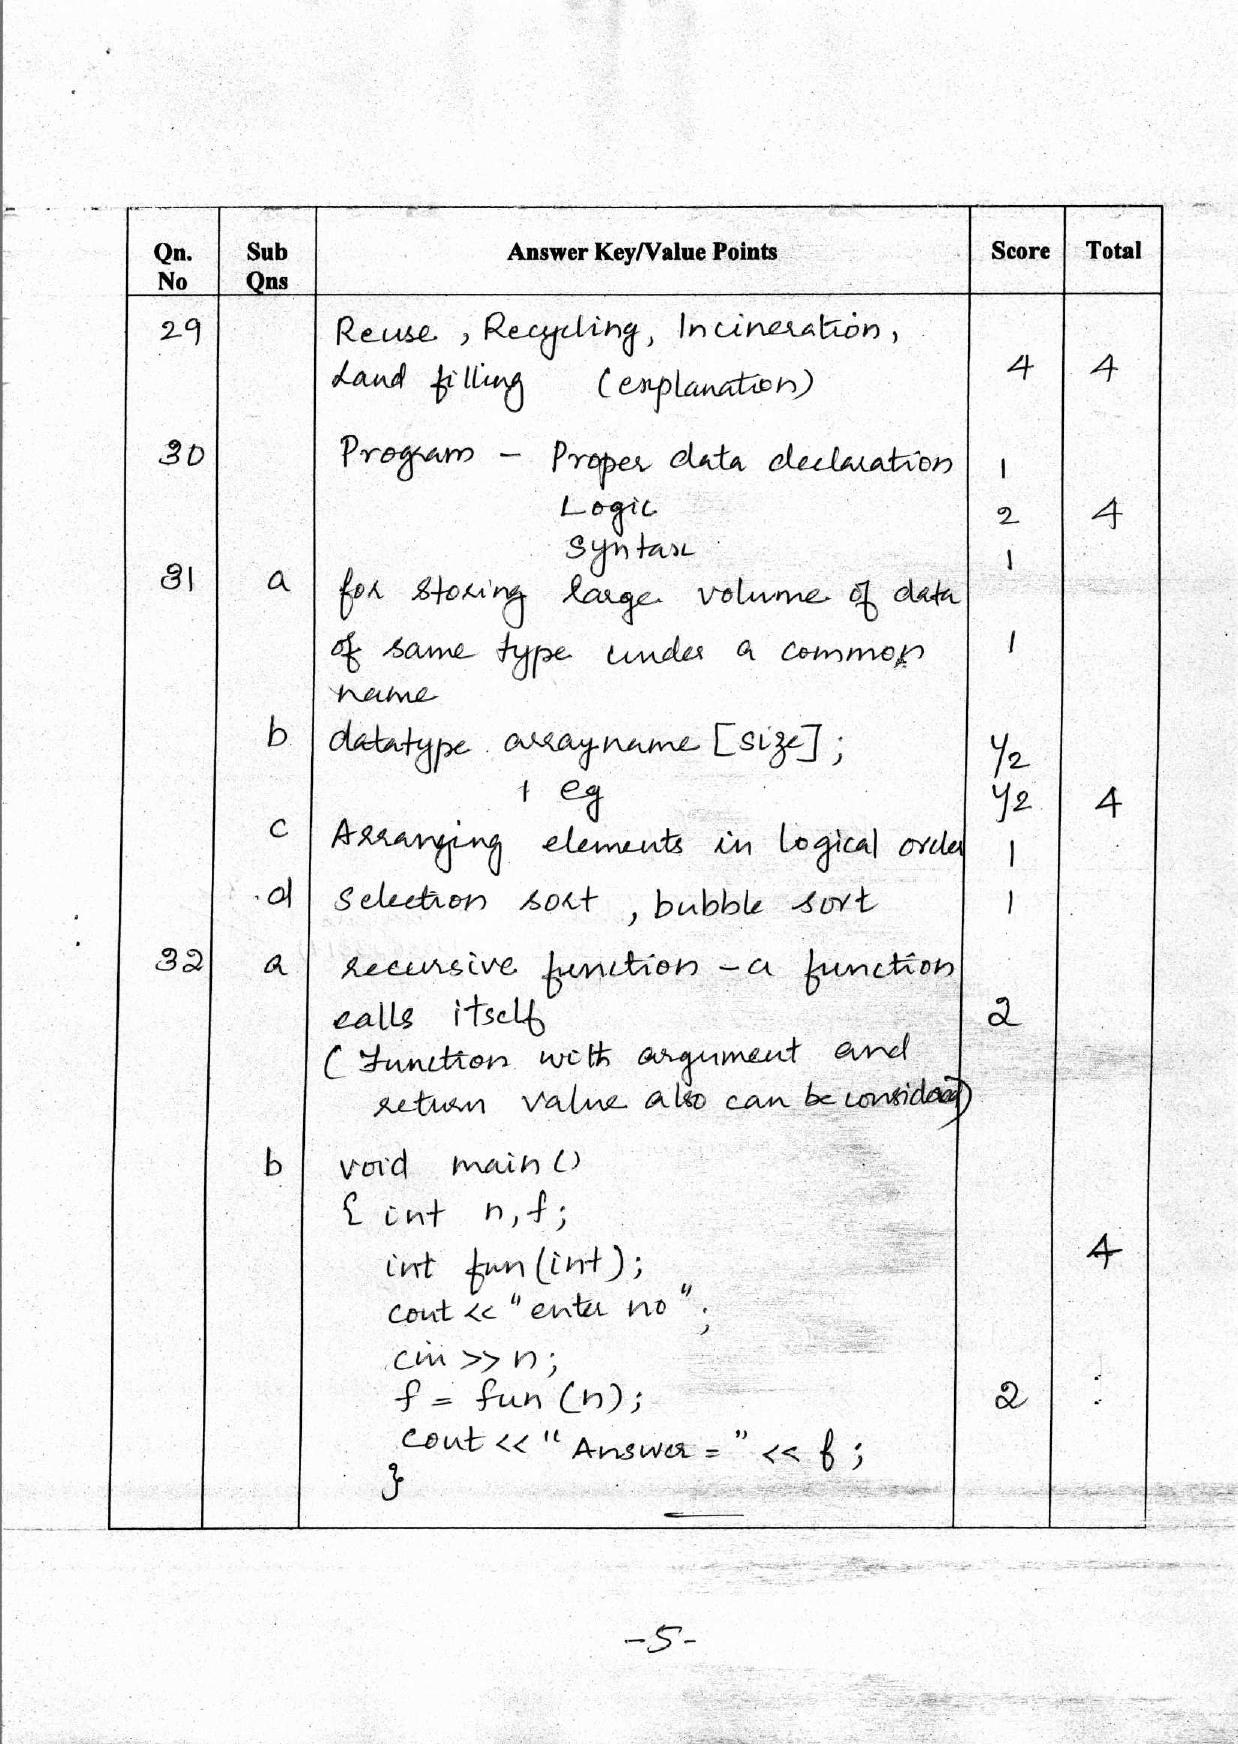 Kerala Plus One 2018 Computer Science and IT Answer Key - Page 5